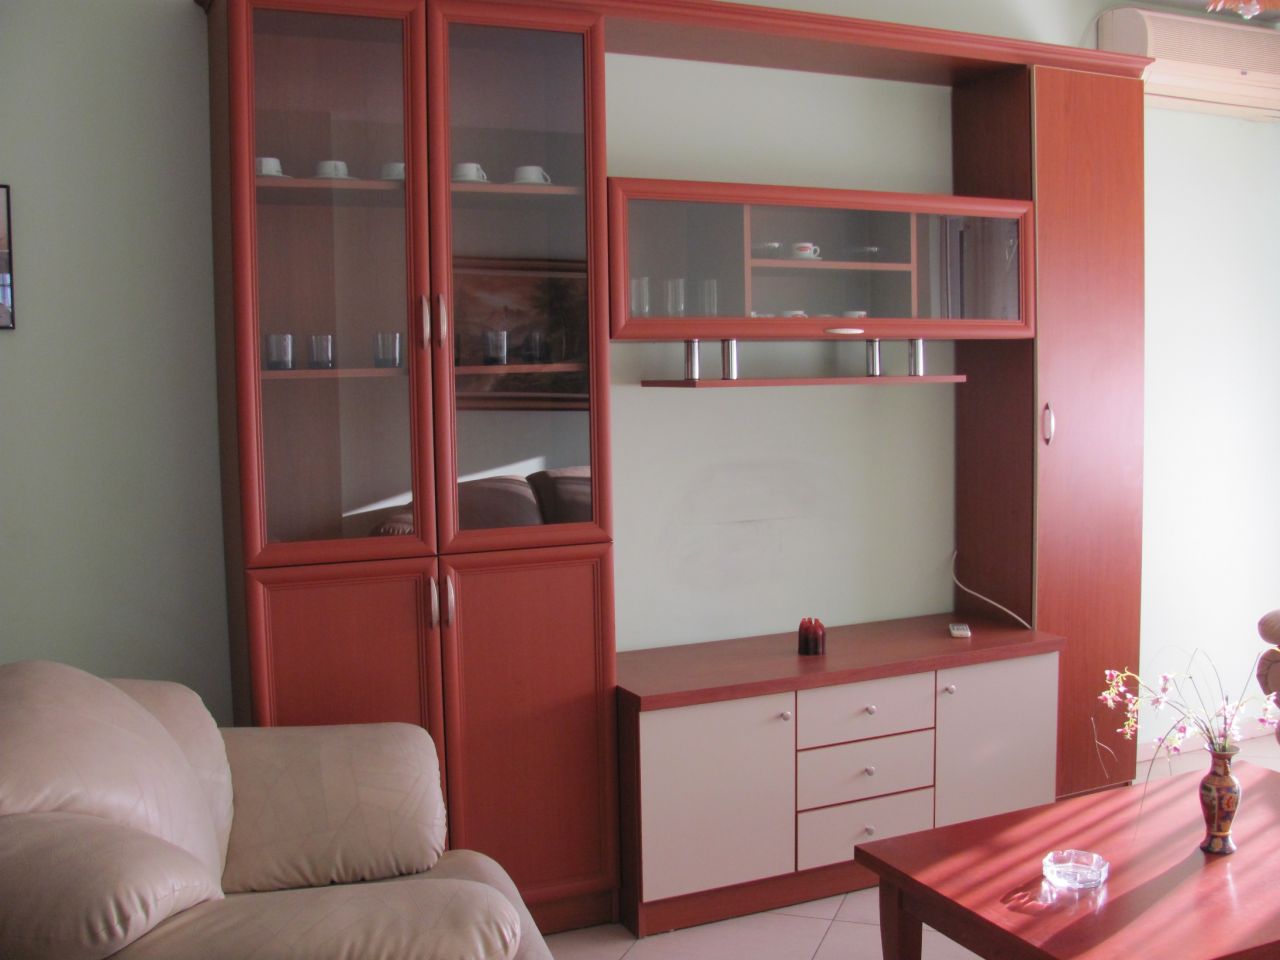 Apartment for rent in Tirana, situated near the Blloku area and the park of the lake. 